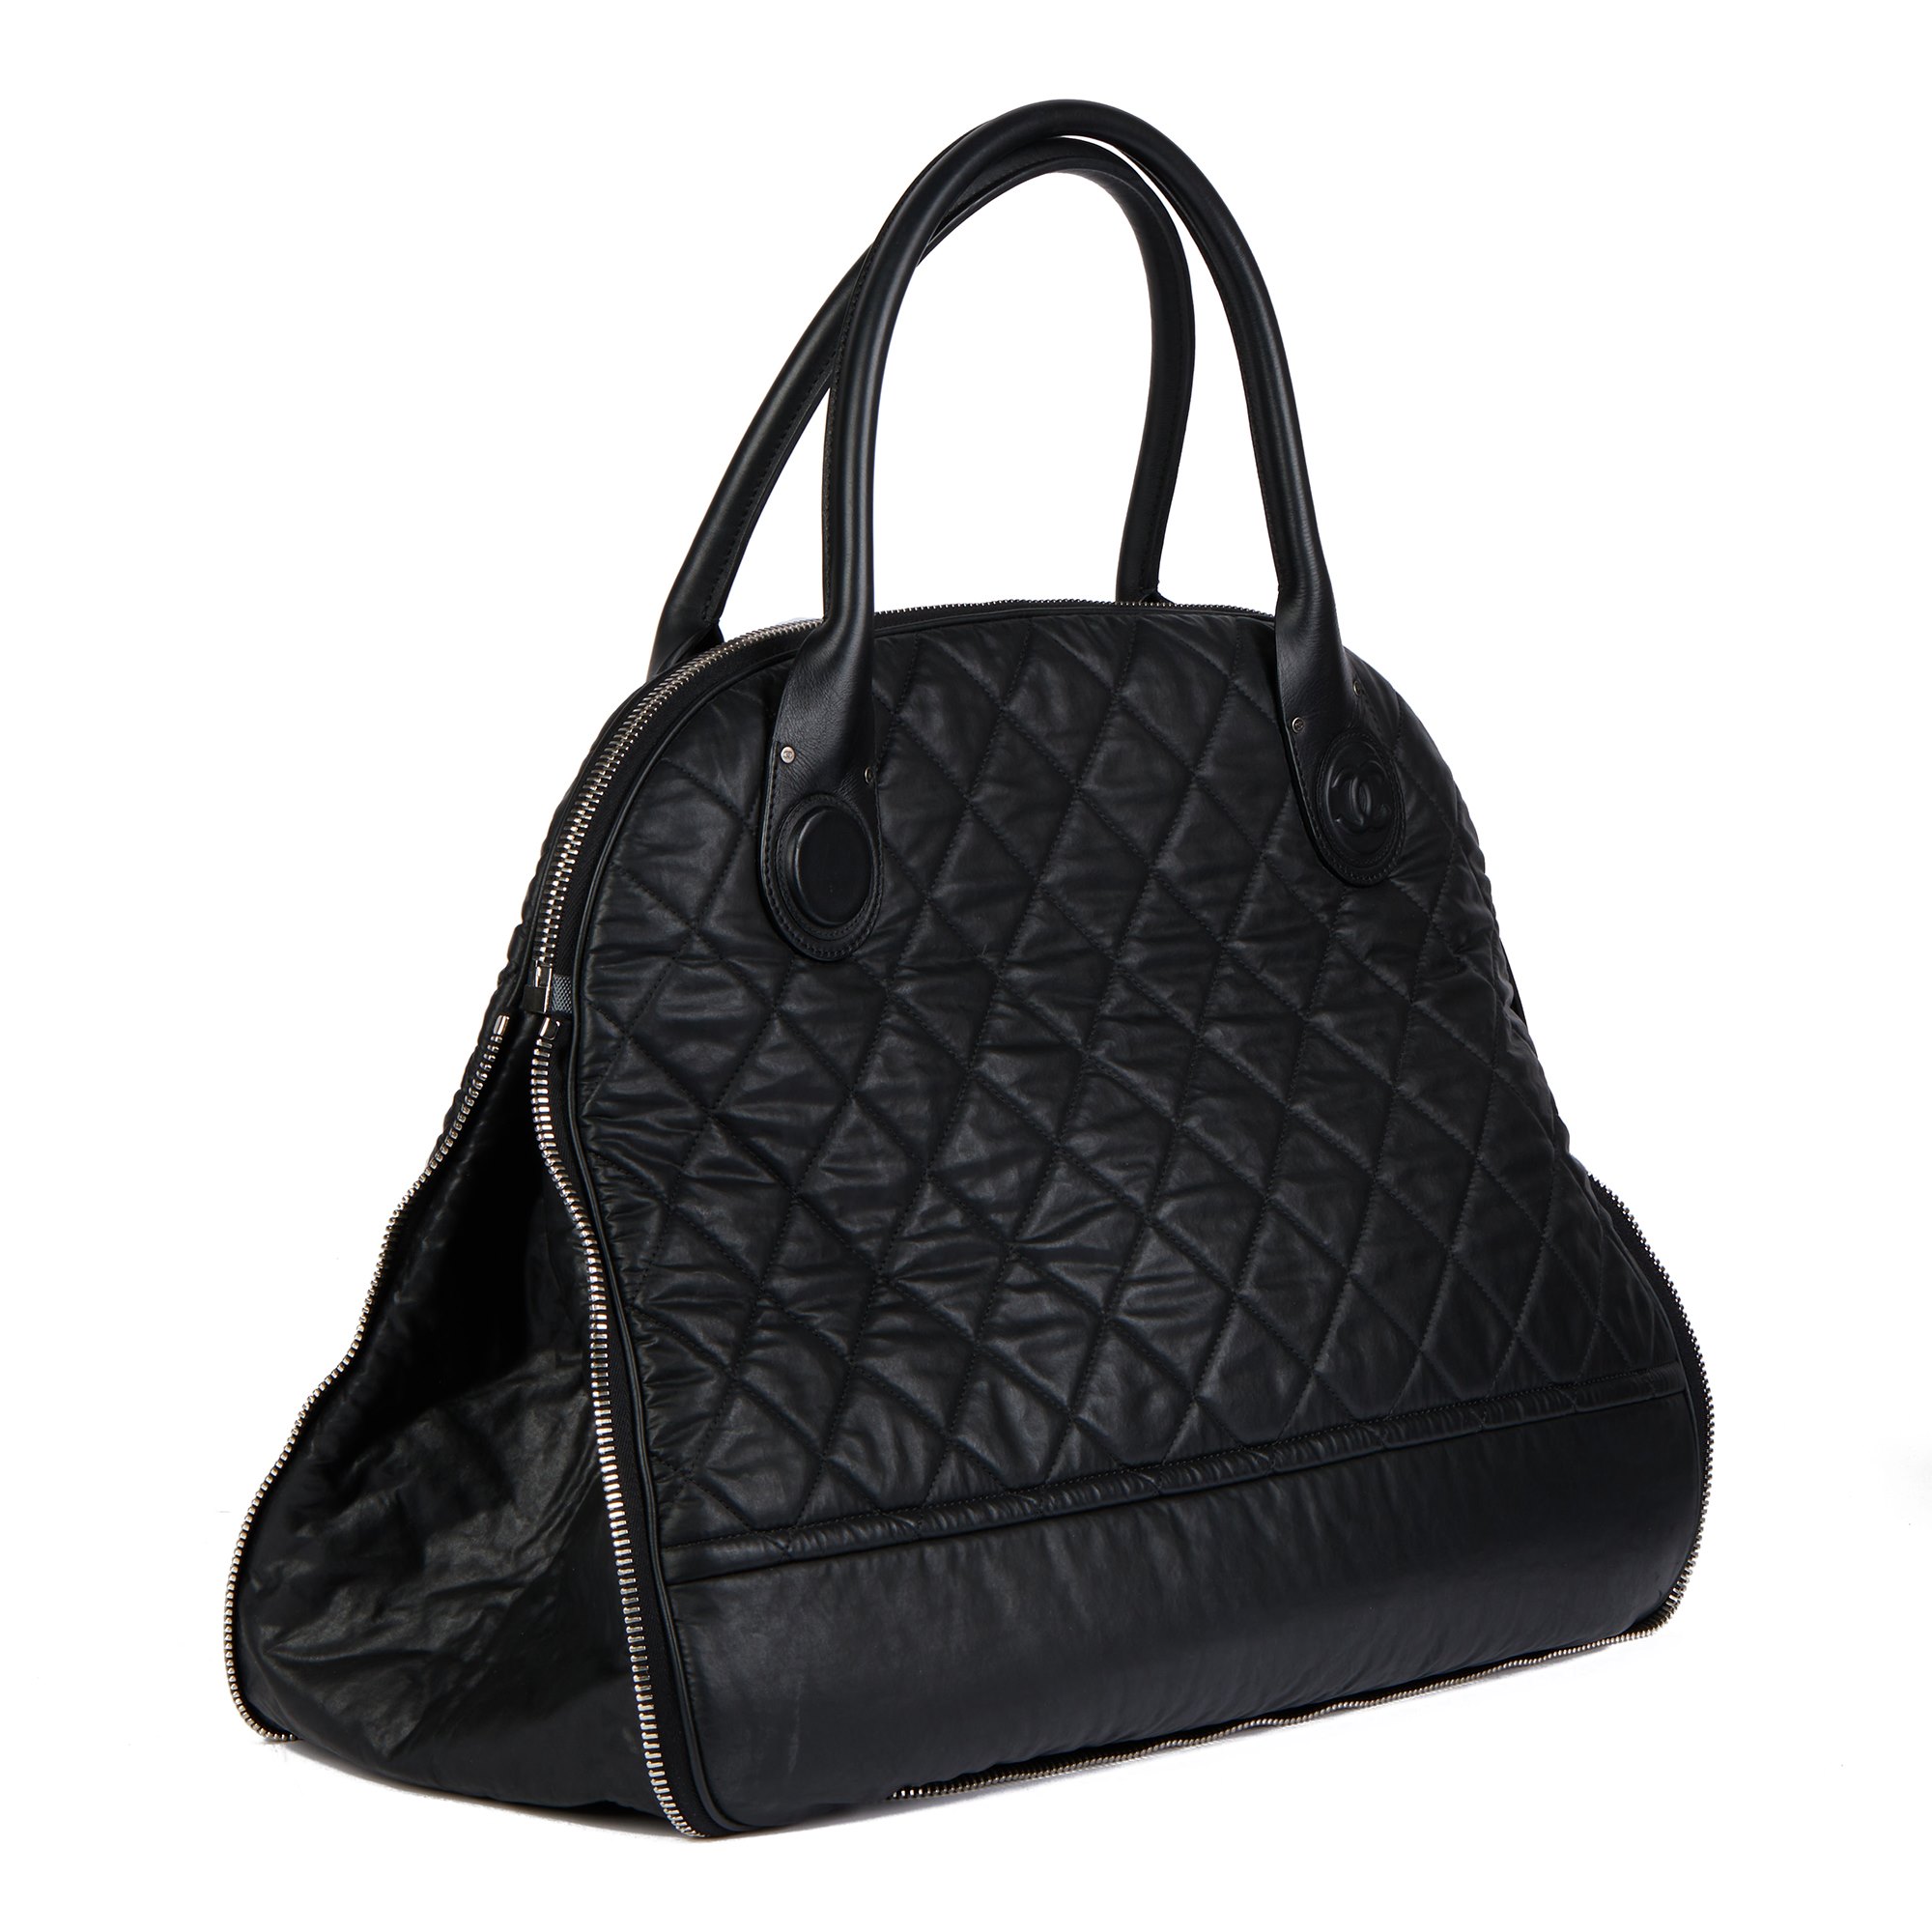 Chanel Black Quilted Nylon & Calfskin Leather Cocoon Dome Tote